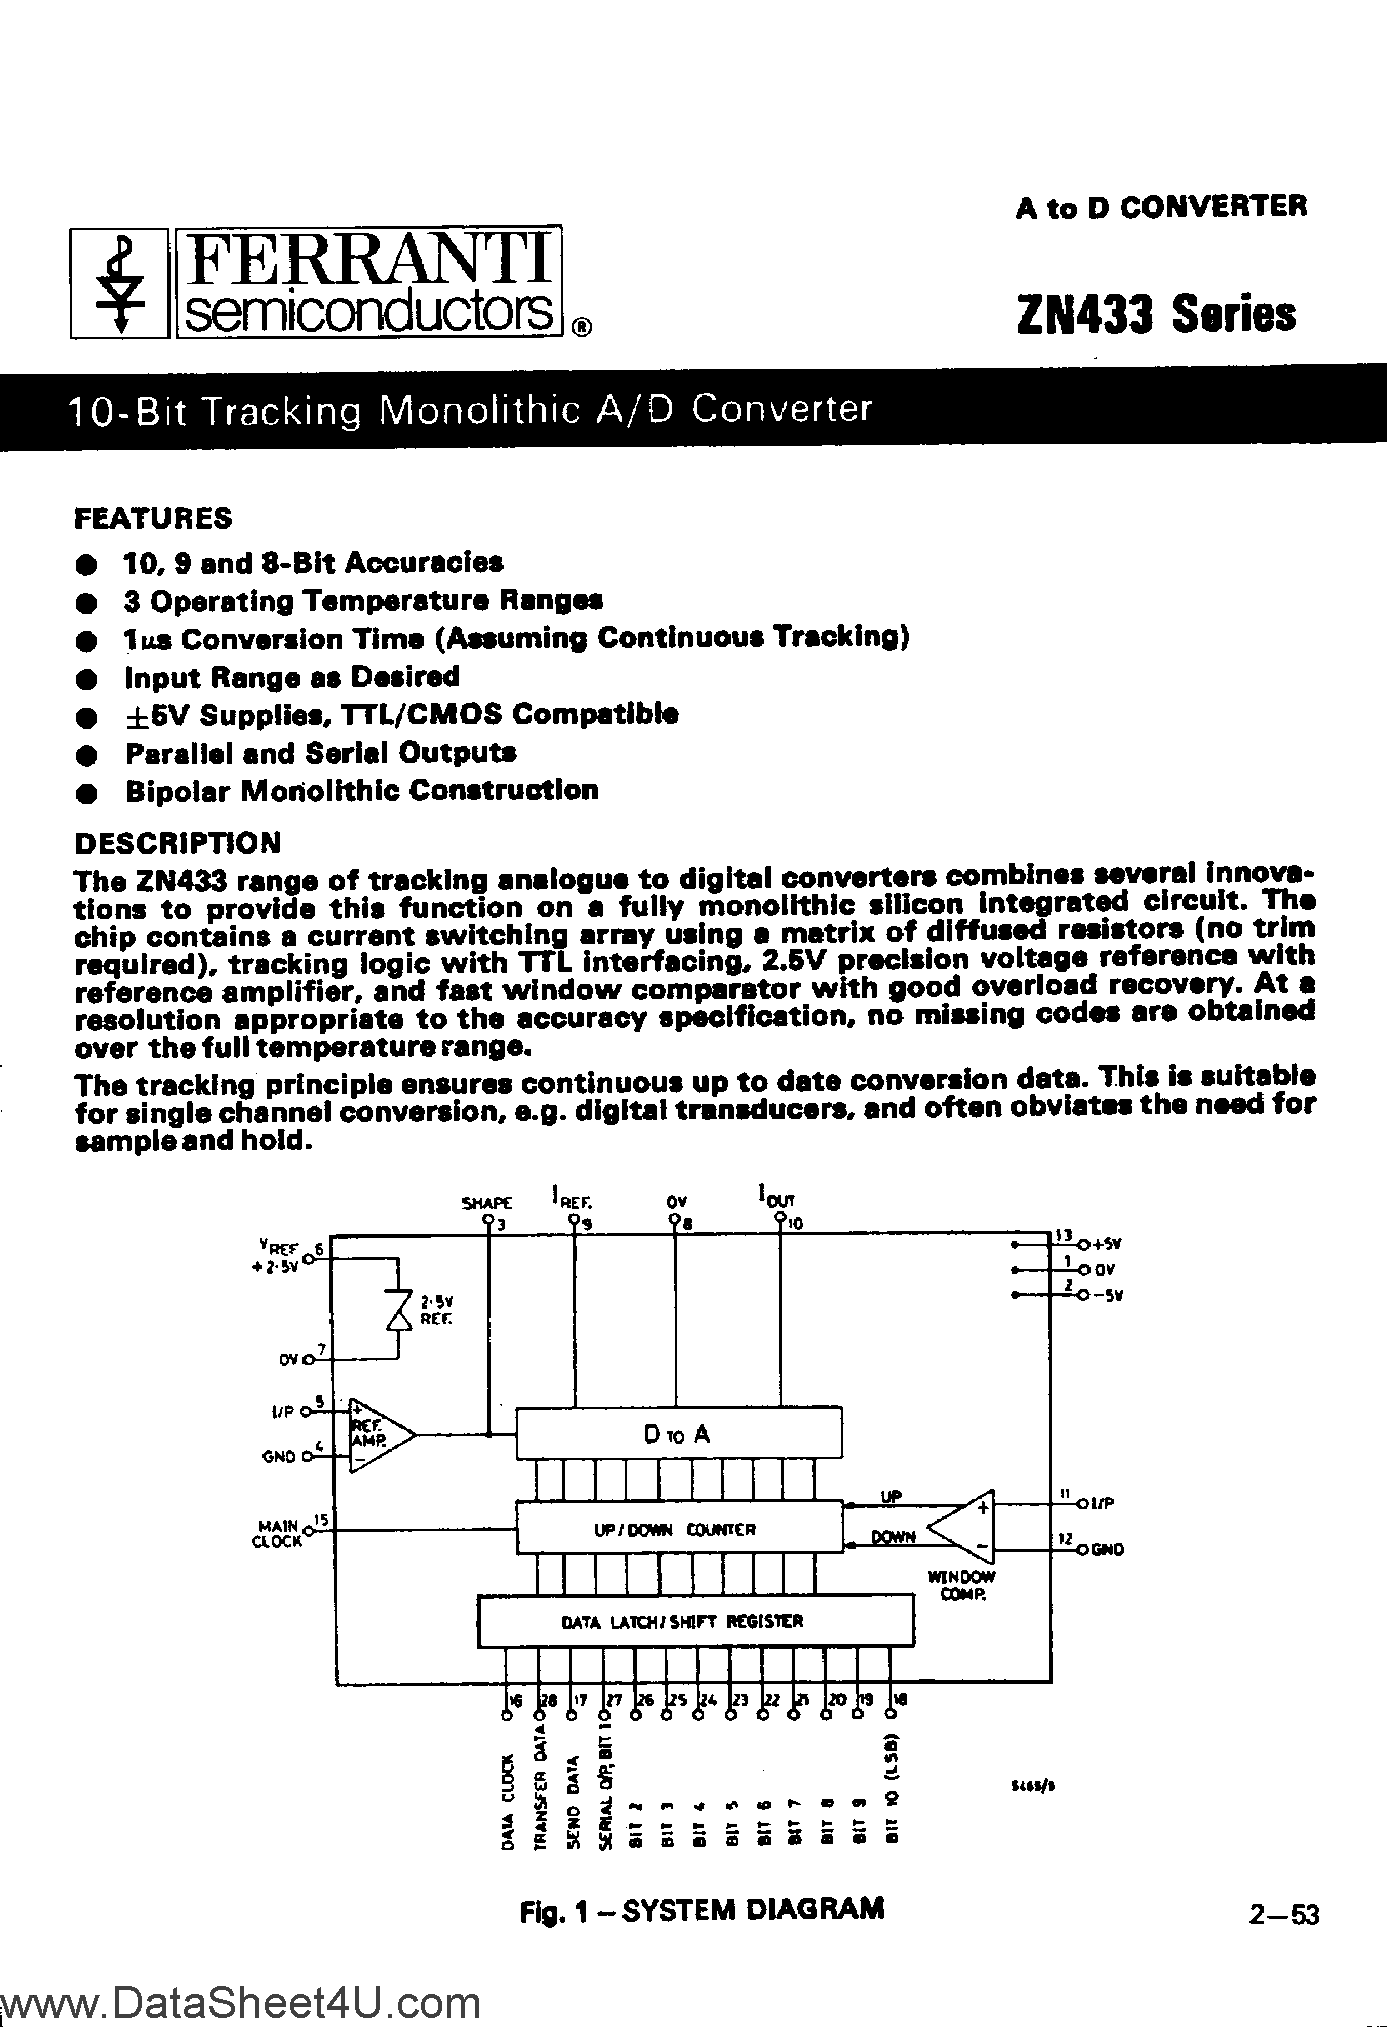 Datasheet ZN433 - 10-Bit Tracking Monolithic A/D Converter page 1